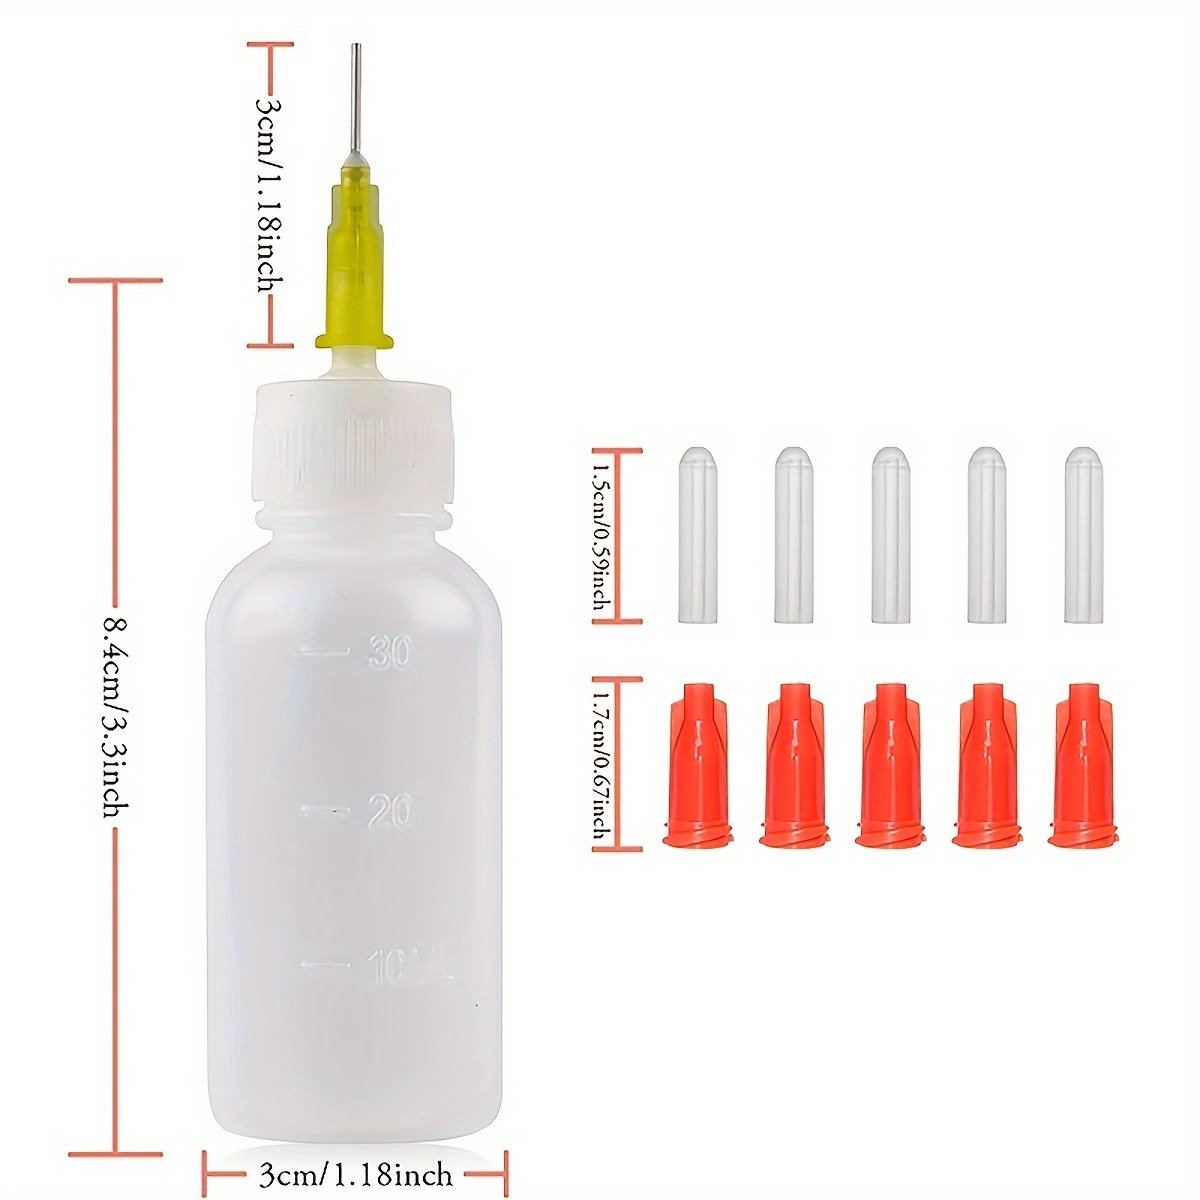 FJNATINH Precision Needle Tip Glue Applicator Bottle with Bent Blunt Needle Tip and Tapered TT Needle for Oil, Adhesive, Liquid